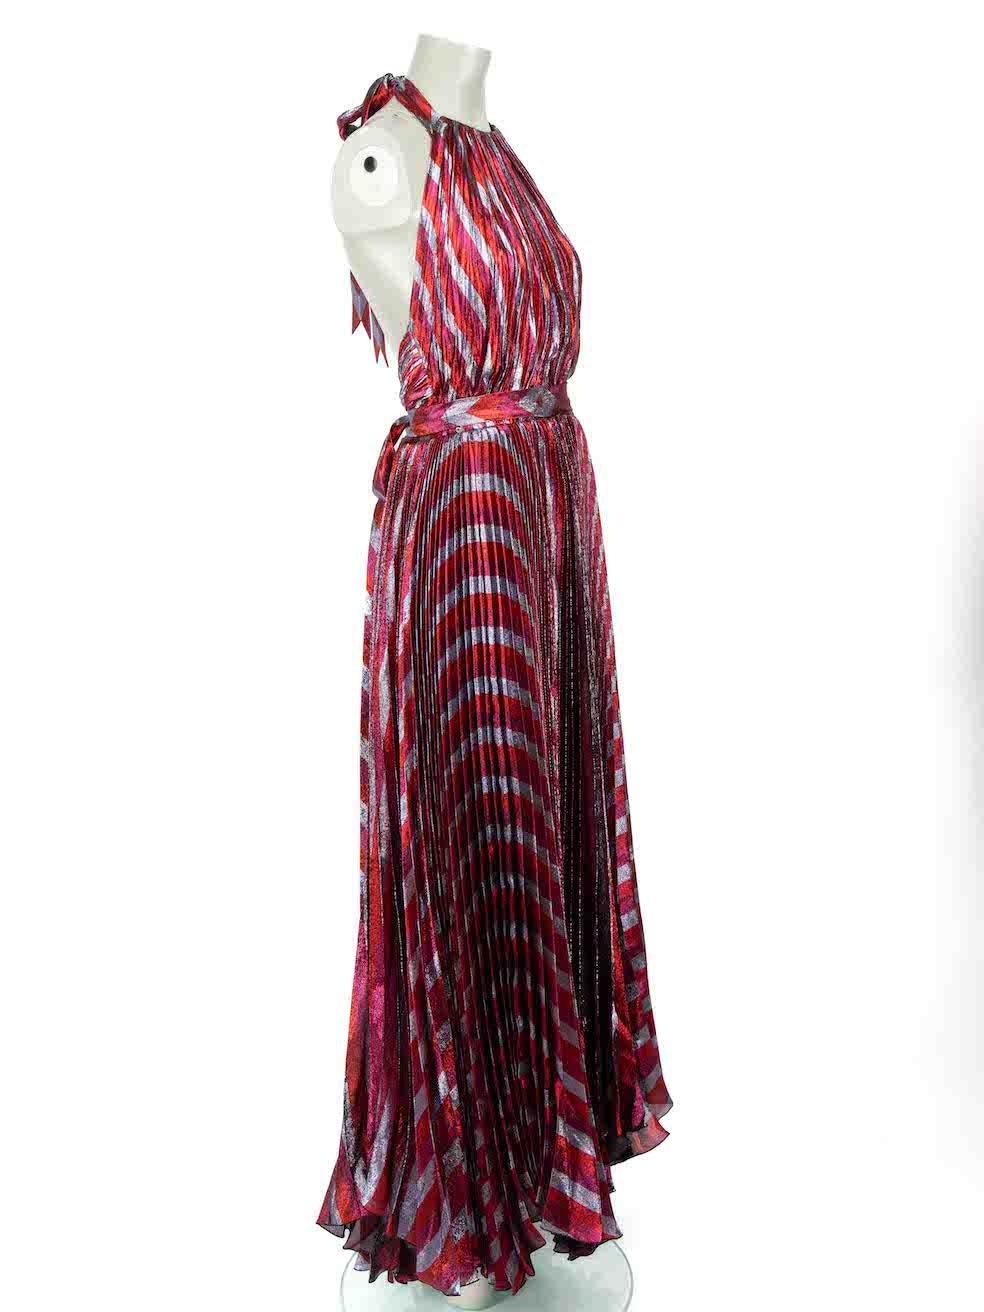 CONDITION is Very good. Hardly any visible wear to dress is evident on this used Maria Lucia Hohan designer resale item.
 
Details
Multicolour metallic
Silk
Dress
Pleated
Striped
Halterneck
Back neck tie
Sleeveless
Open back
Maxi
Back zip and hook